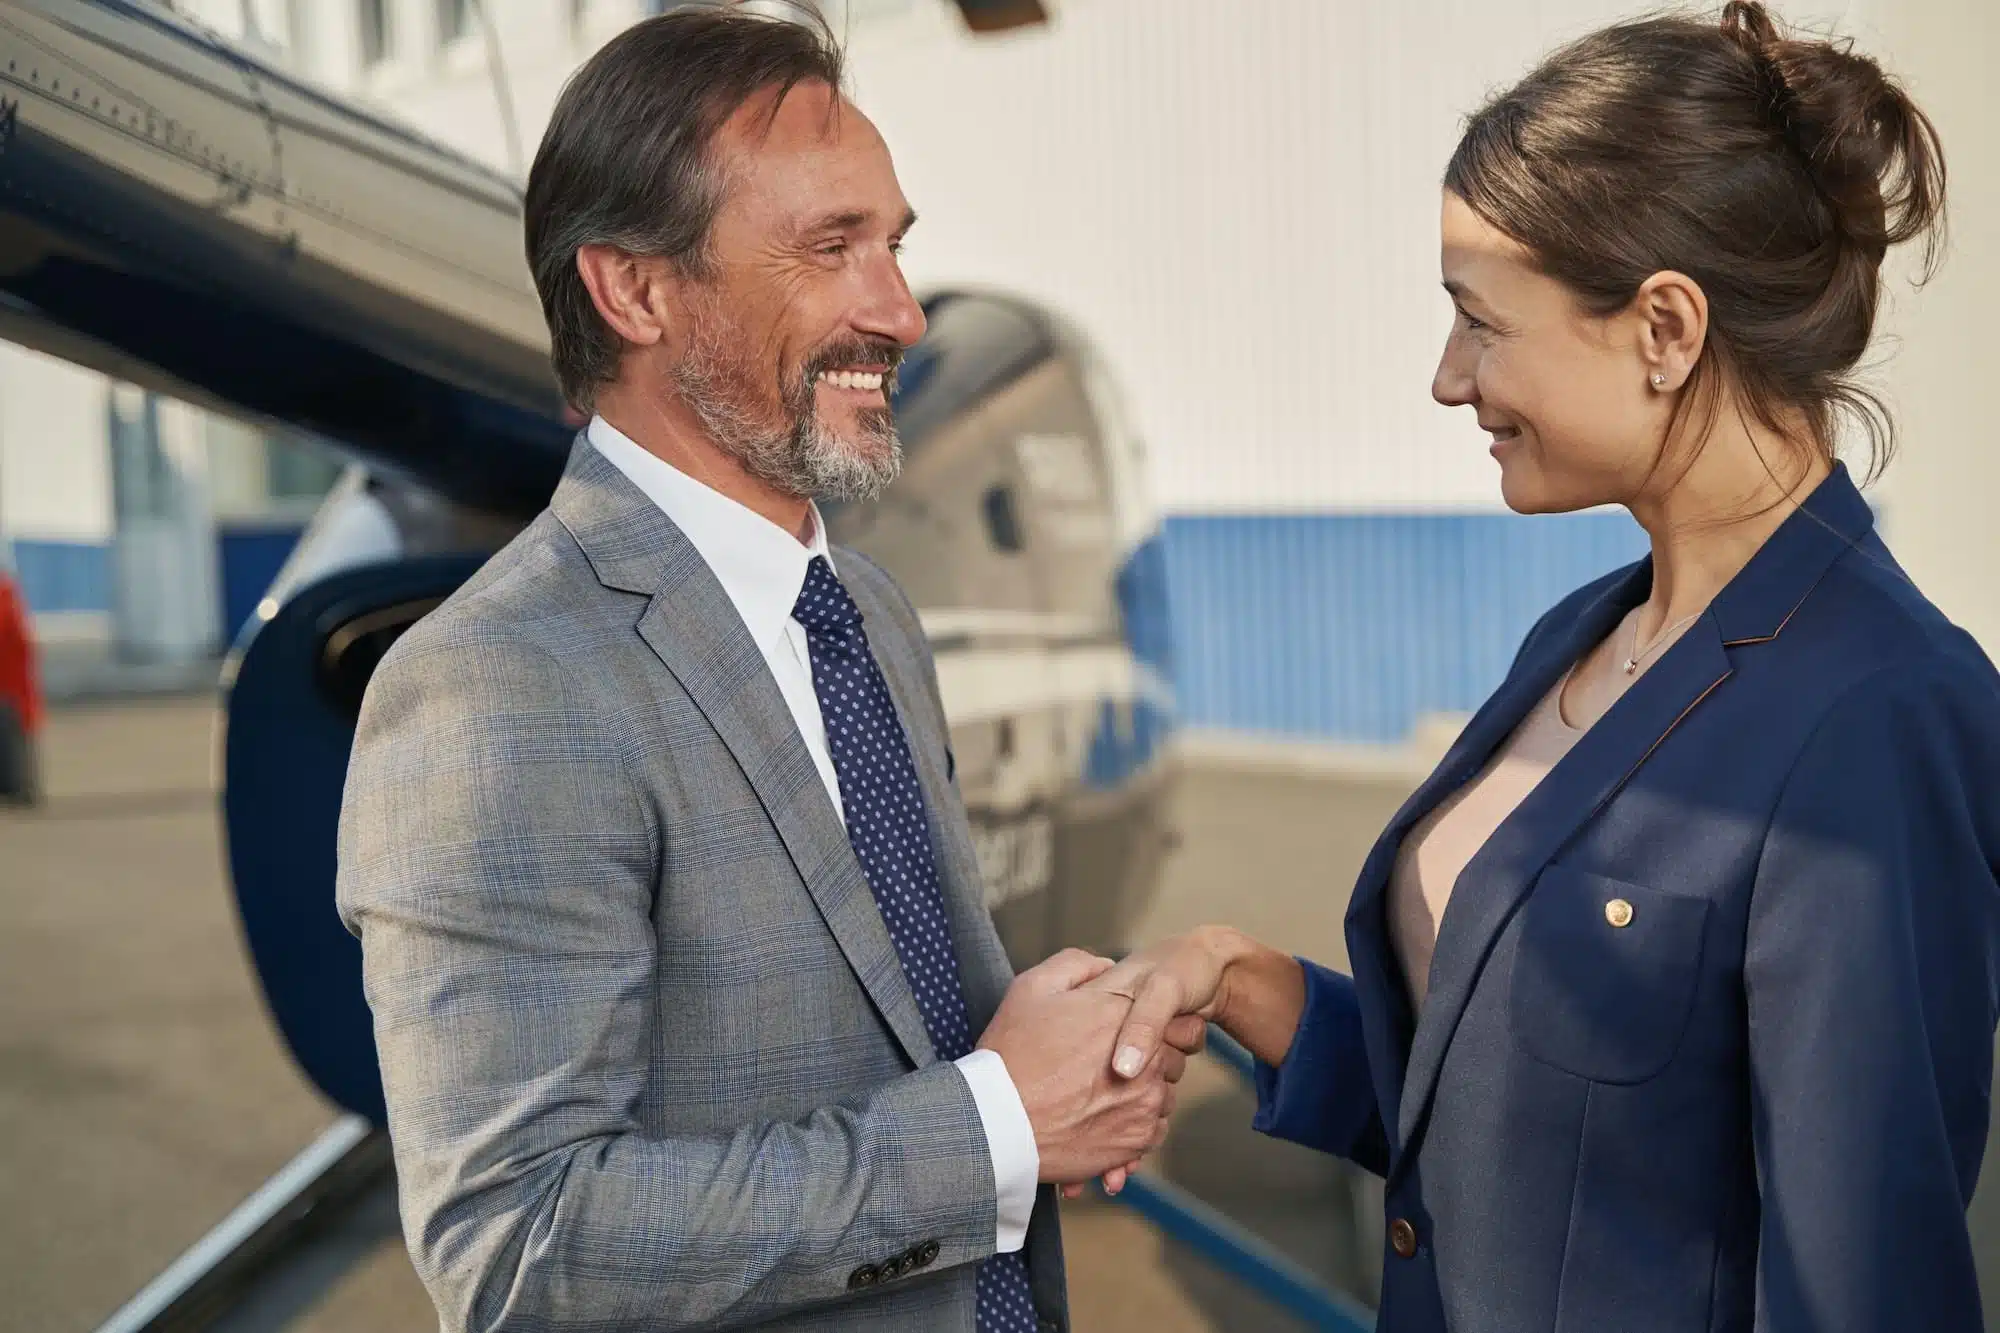 Two businesspeople greeting each other at heliport